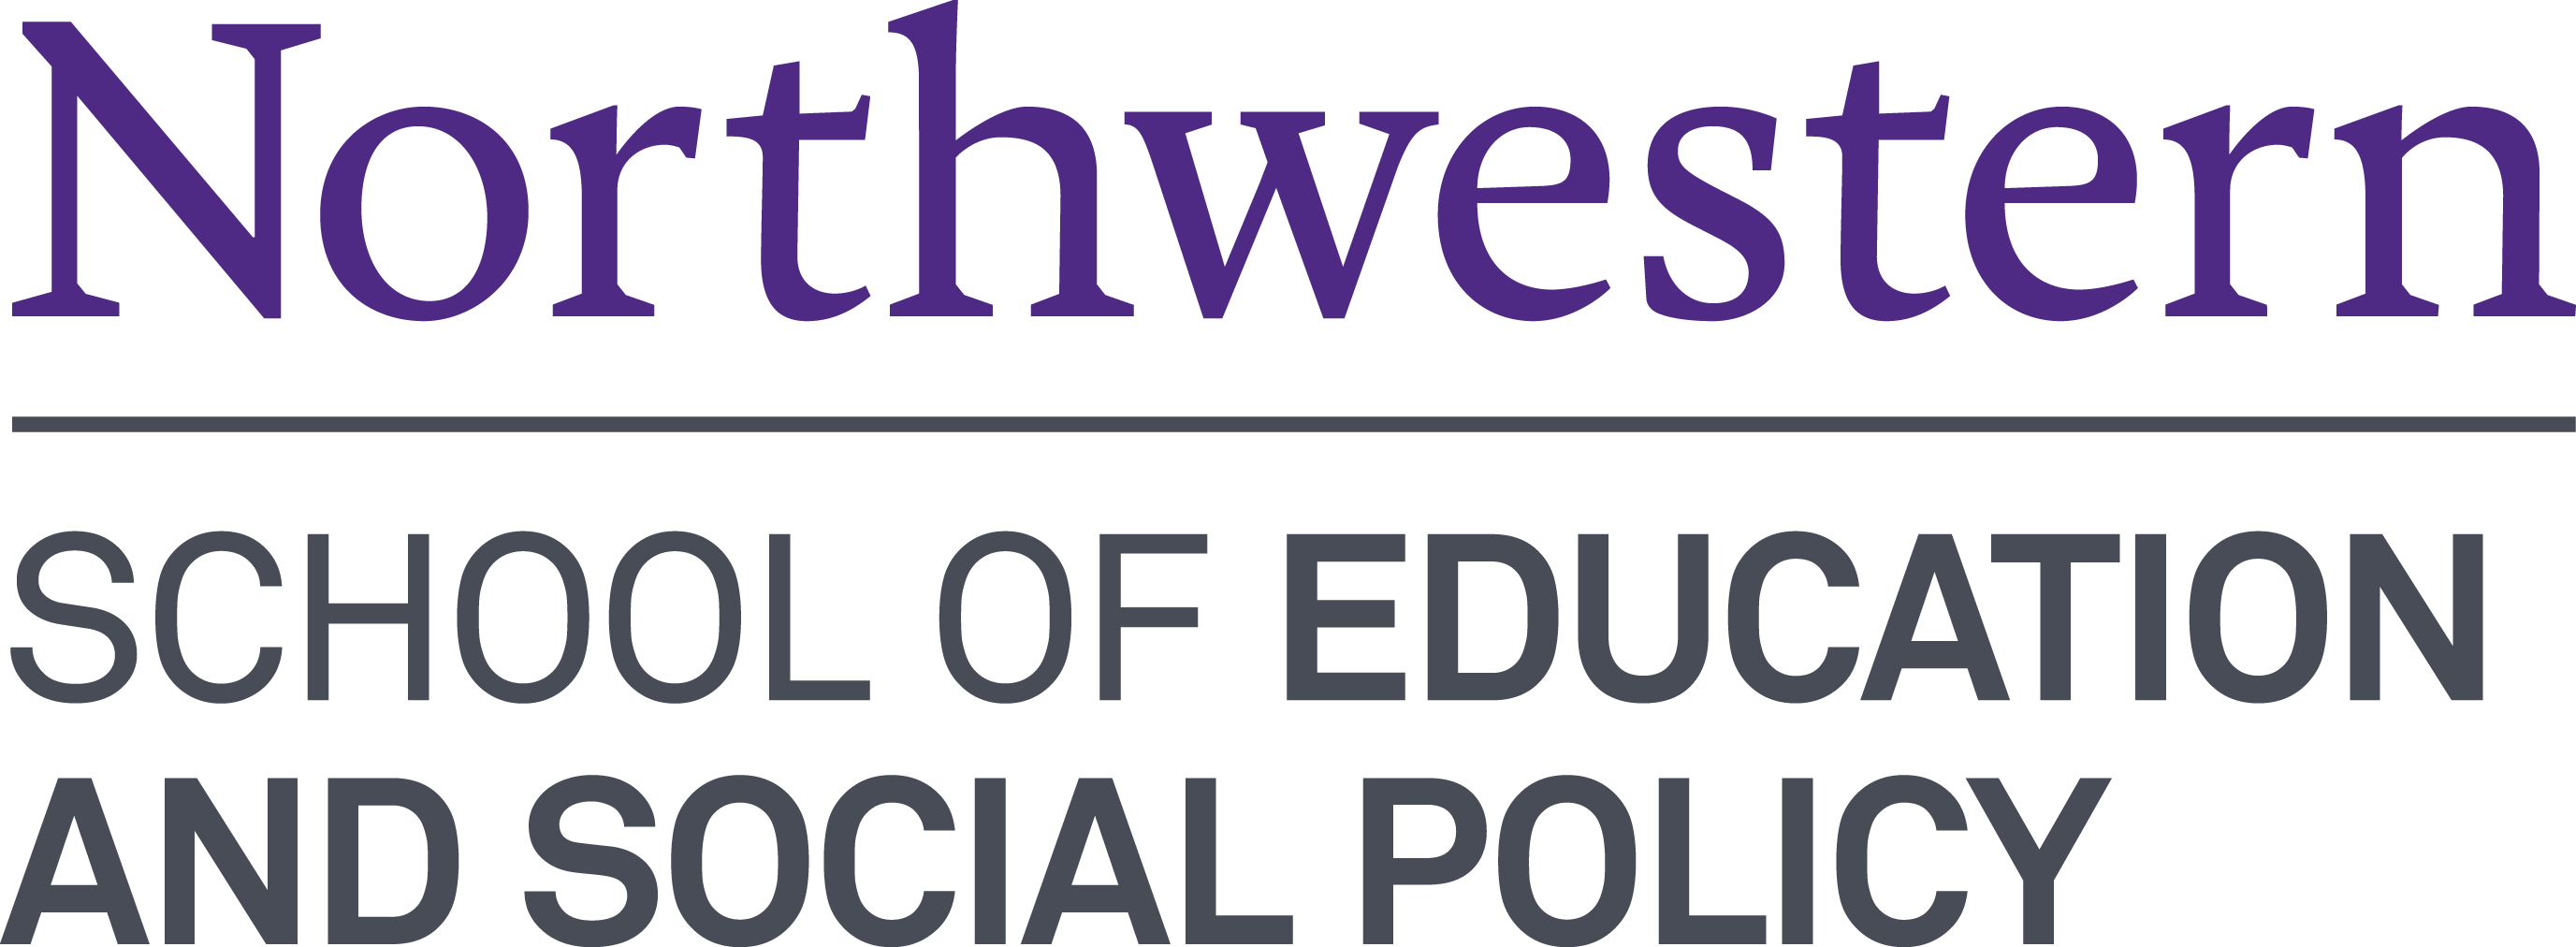 About the School of Education and Social Policy at Northwestern University Logo